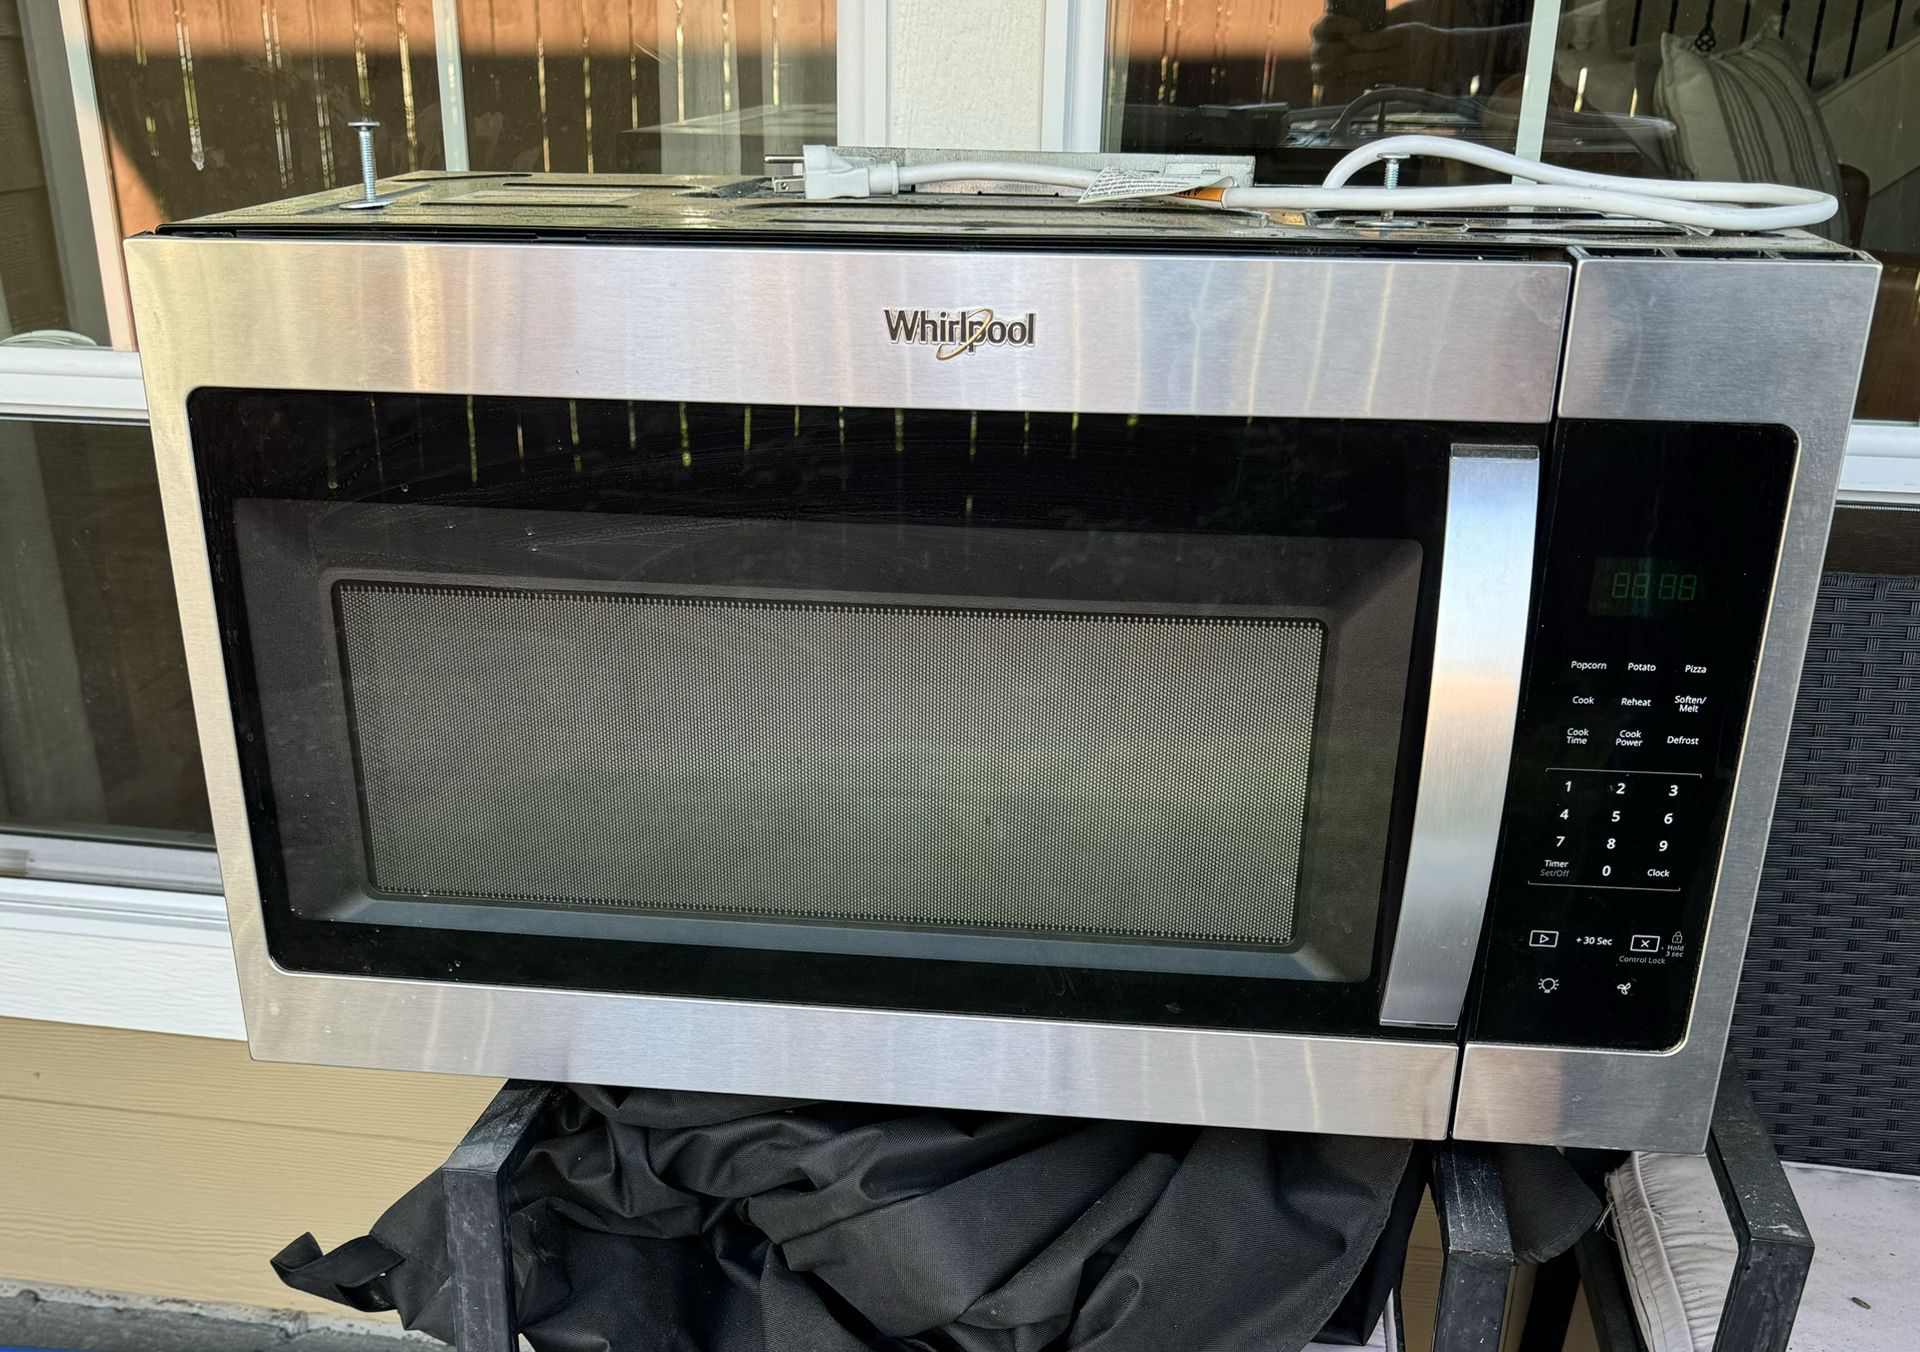 Whirlpool Microwave Oven With Fan